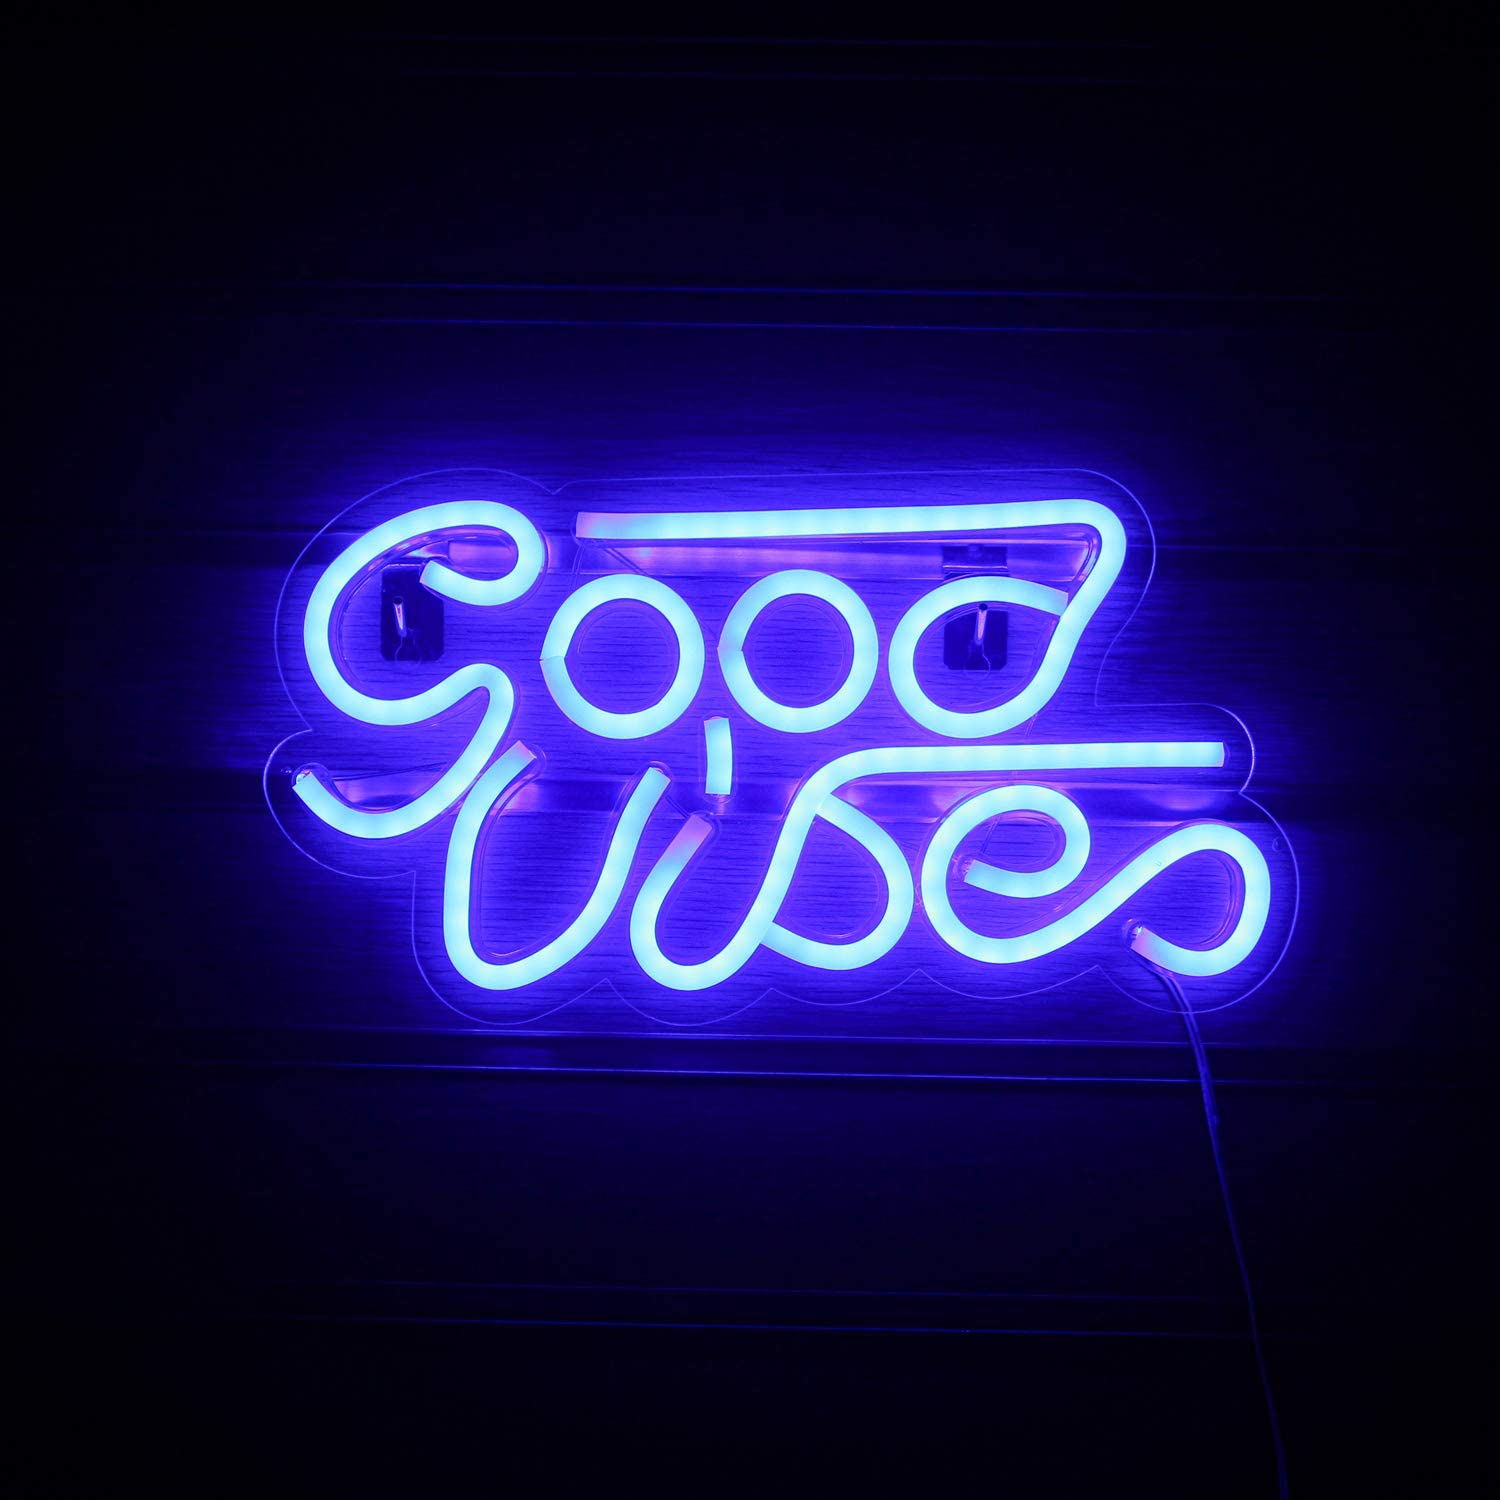 Good Vibes Neon Signs Neon Lights For Room Decor Light Bedroom Christmas  Bar Pub Hotel Party Restaurant Leisure Playroom Wall Art Decoration Powered  By Usb (19.6 